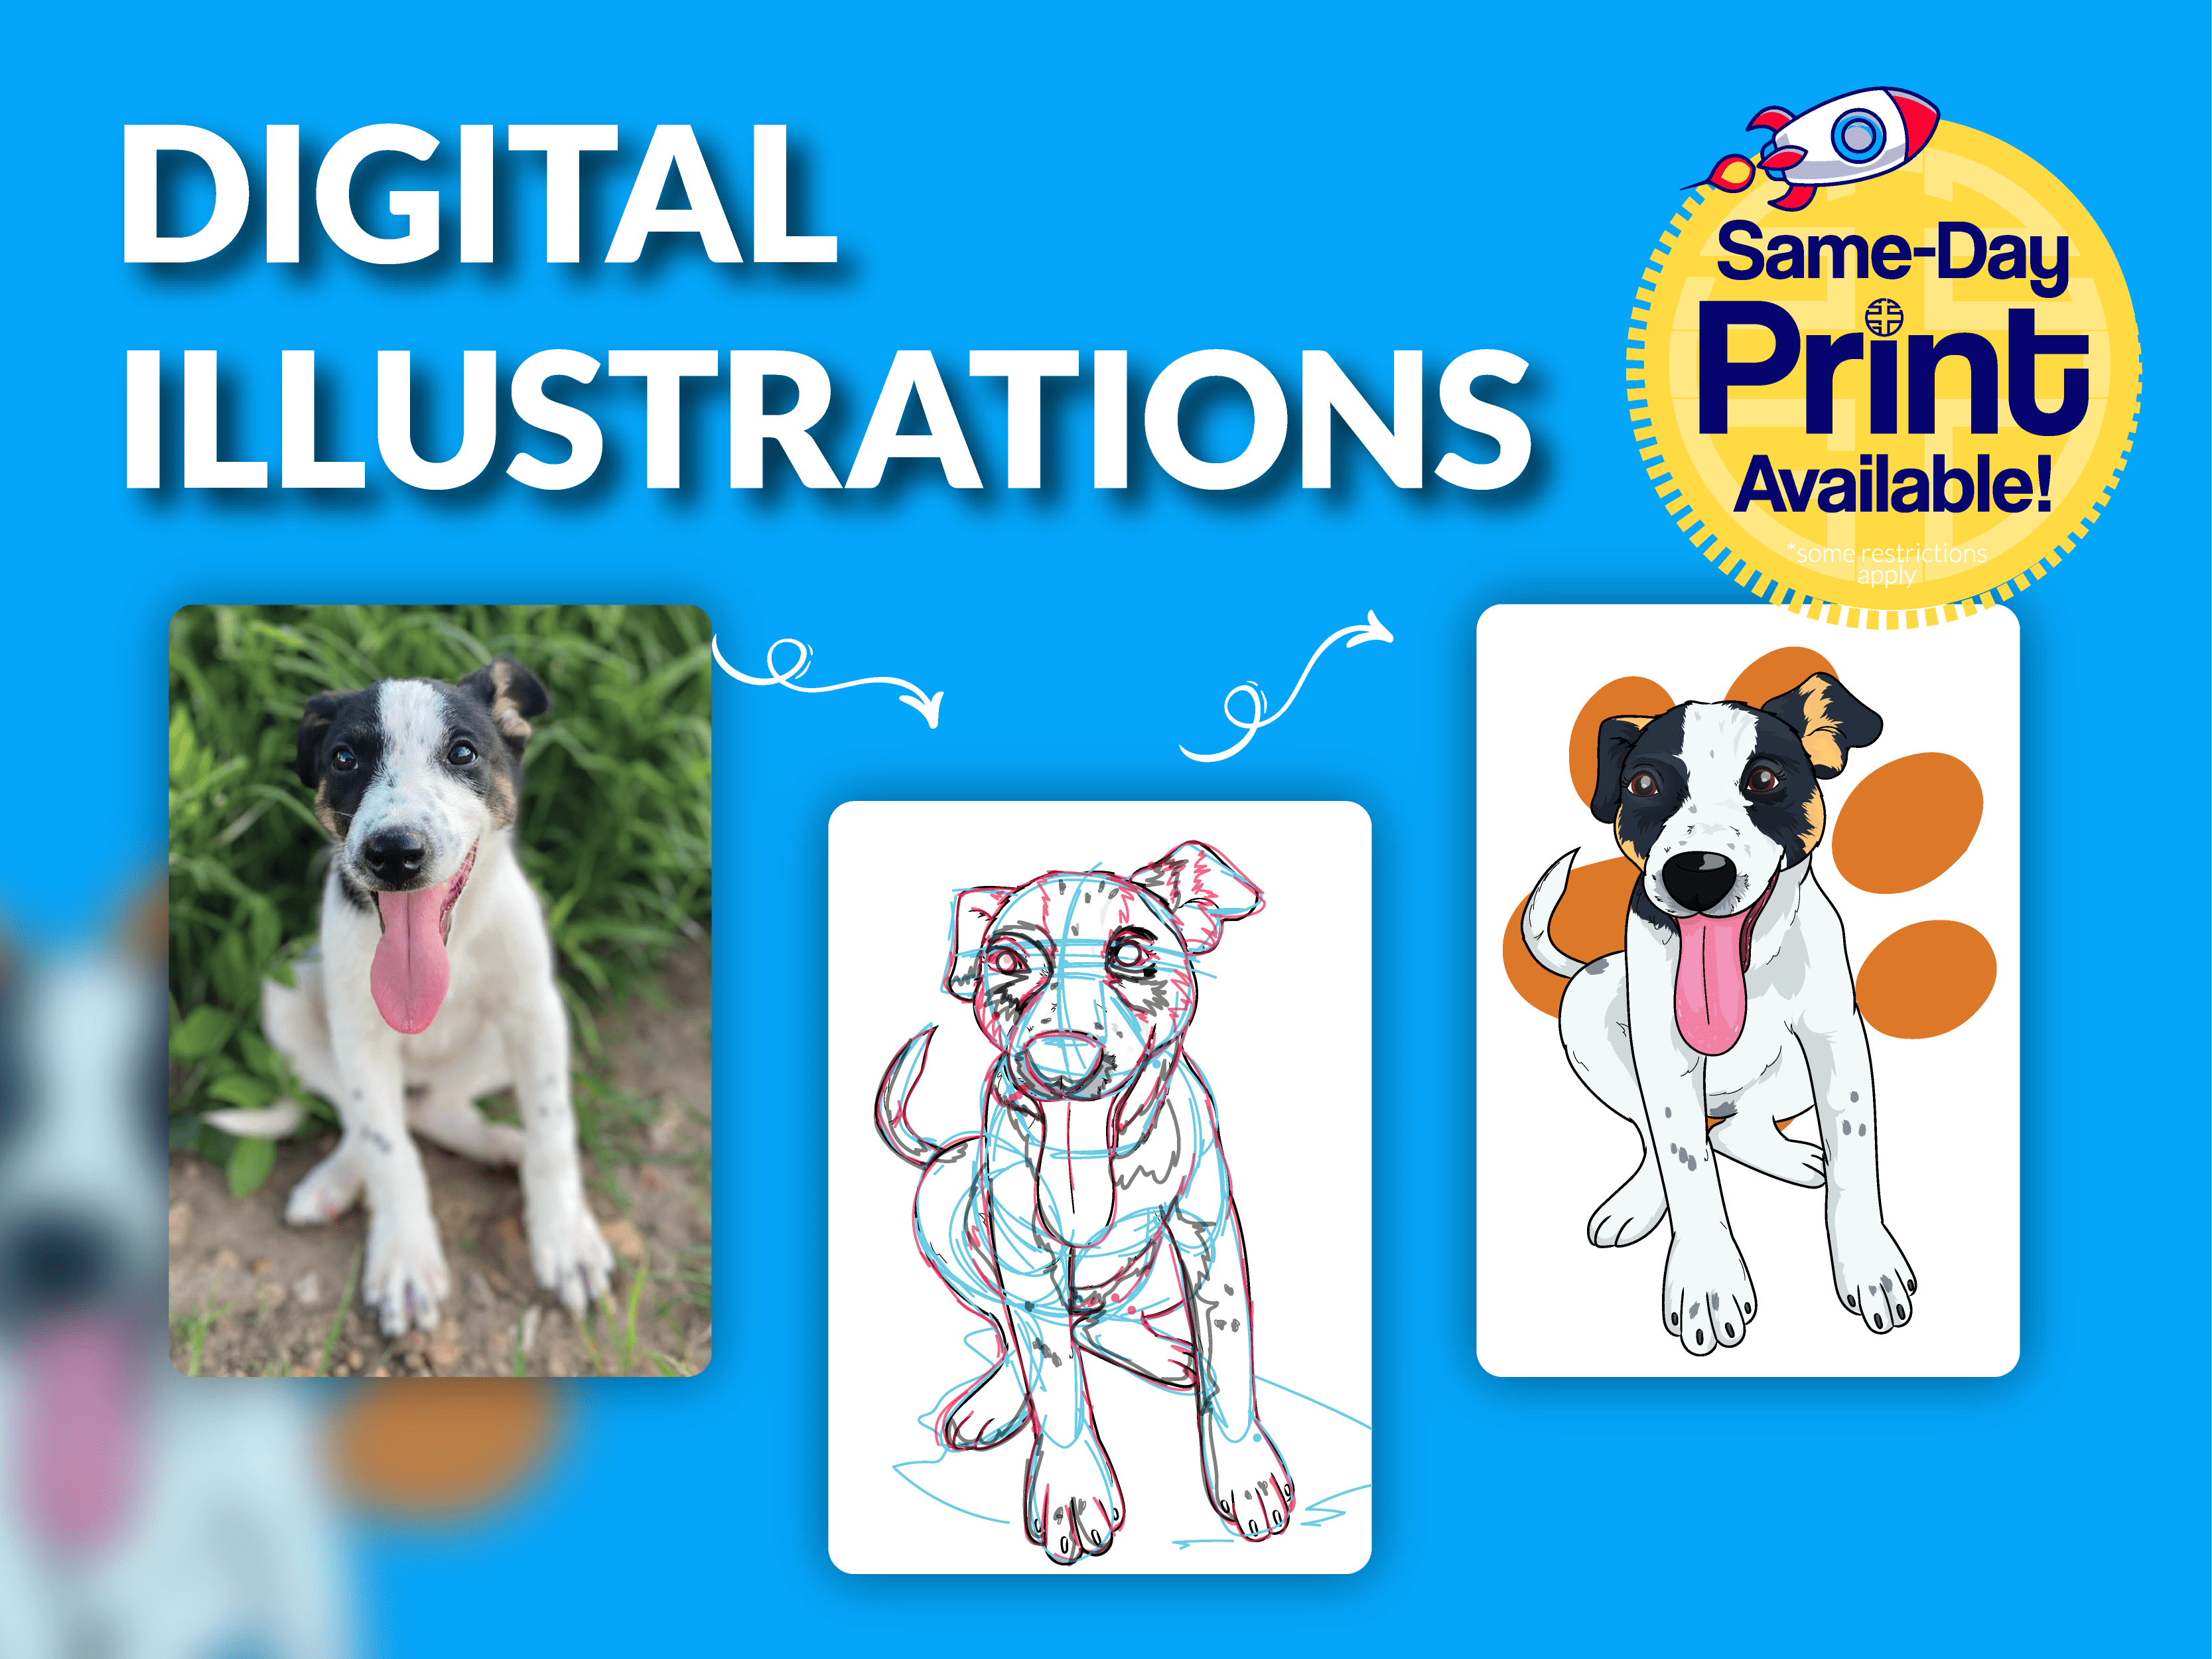 This image refers to our Digital Illustrations promotion with Same Day Print Available. To learn more about Digital Illustrations, feel free to check out the 'Services' section in the menu. Happy exploring!